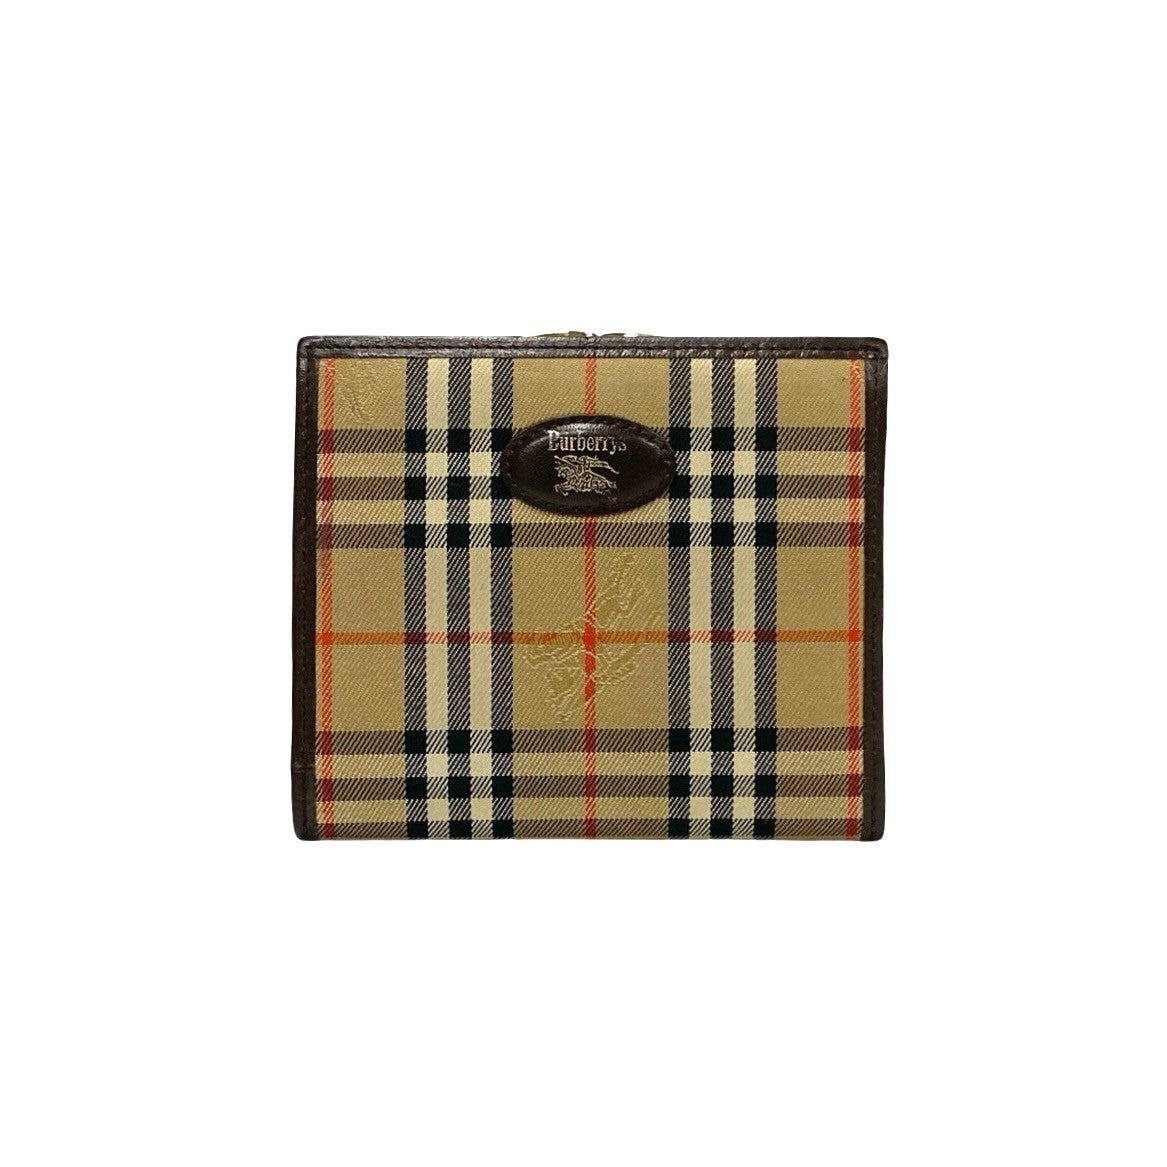 Burberry Shadow Horse Bifold Wallet Canvas Short Wallet 31663 in Good condition